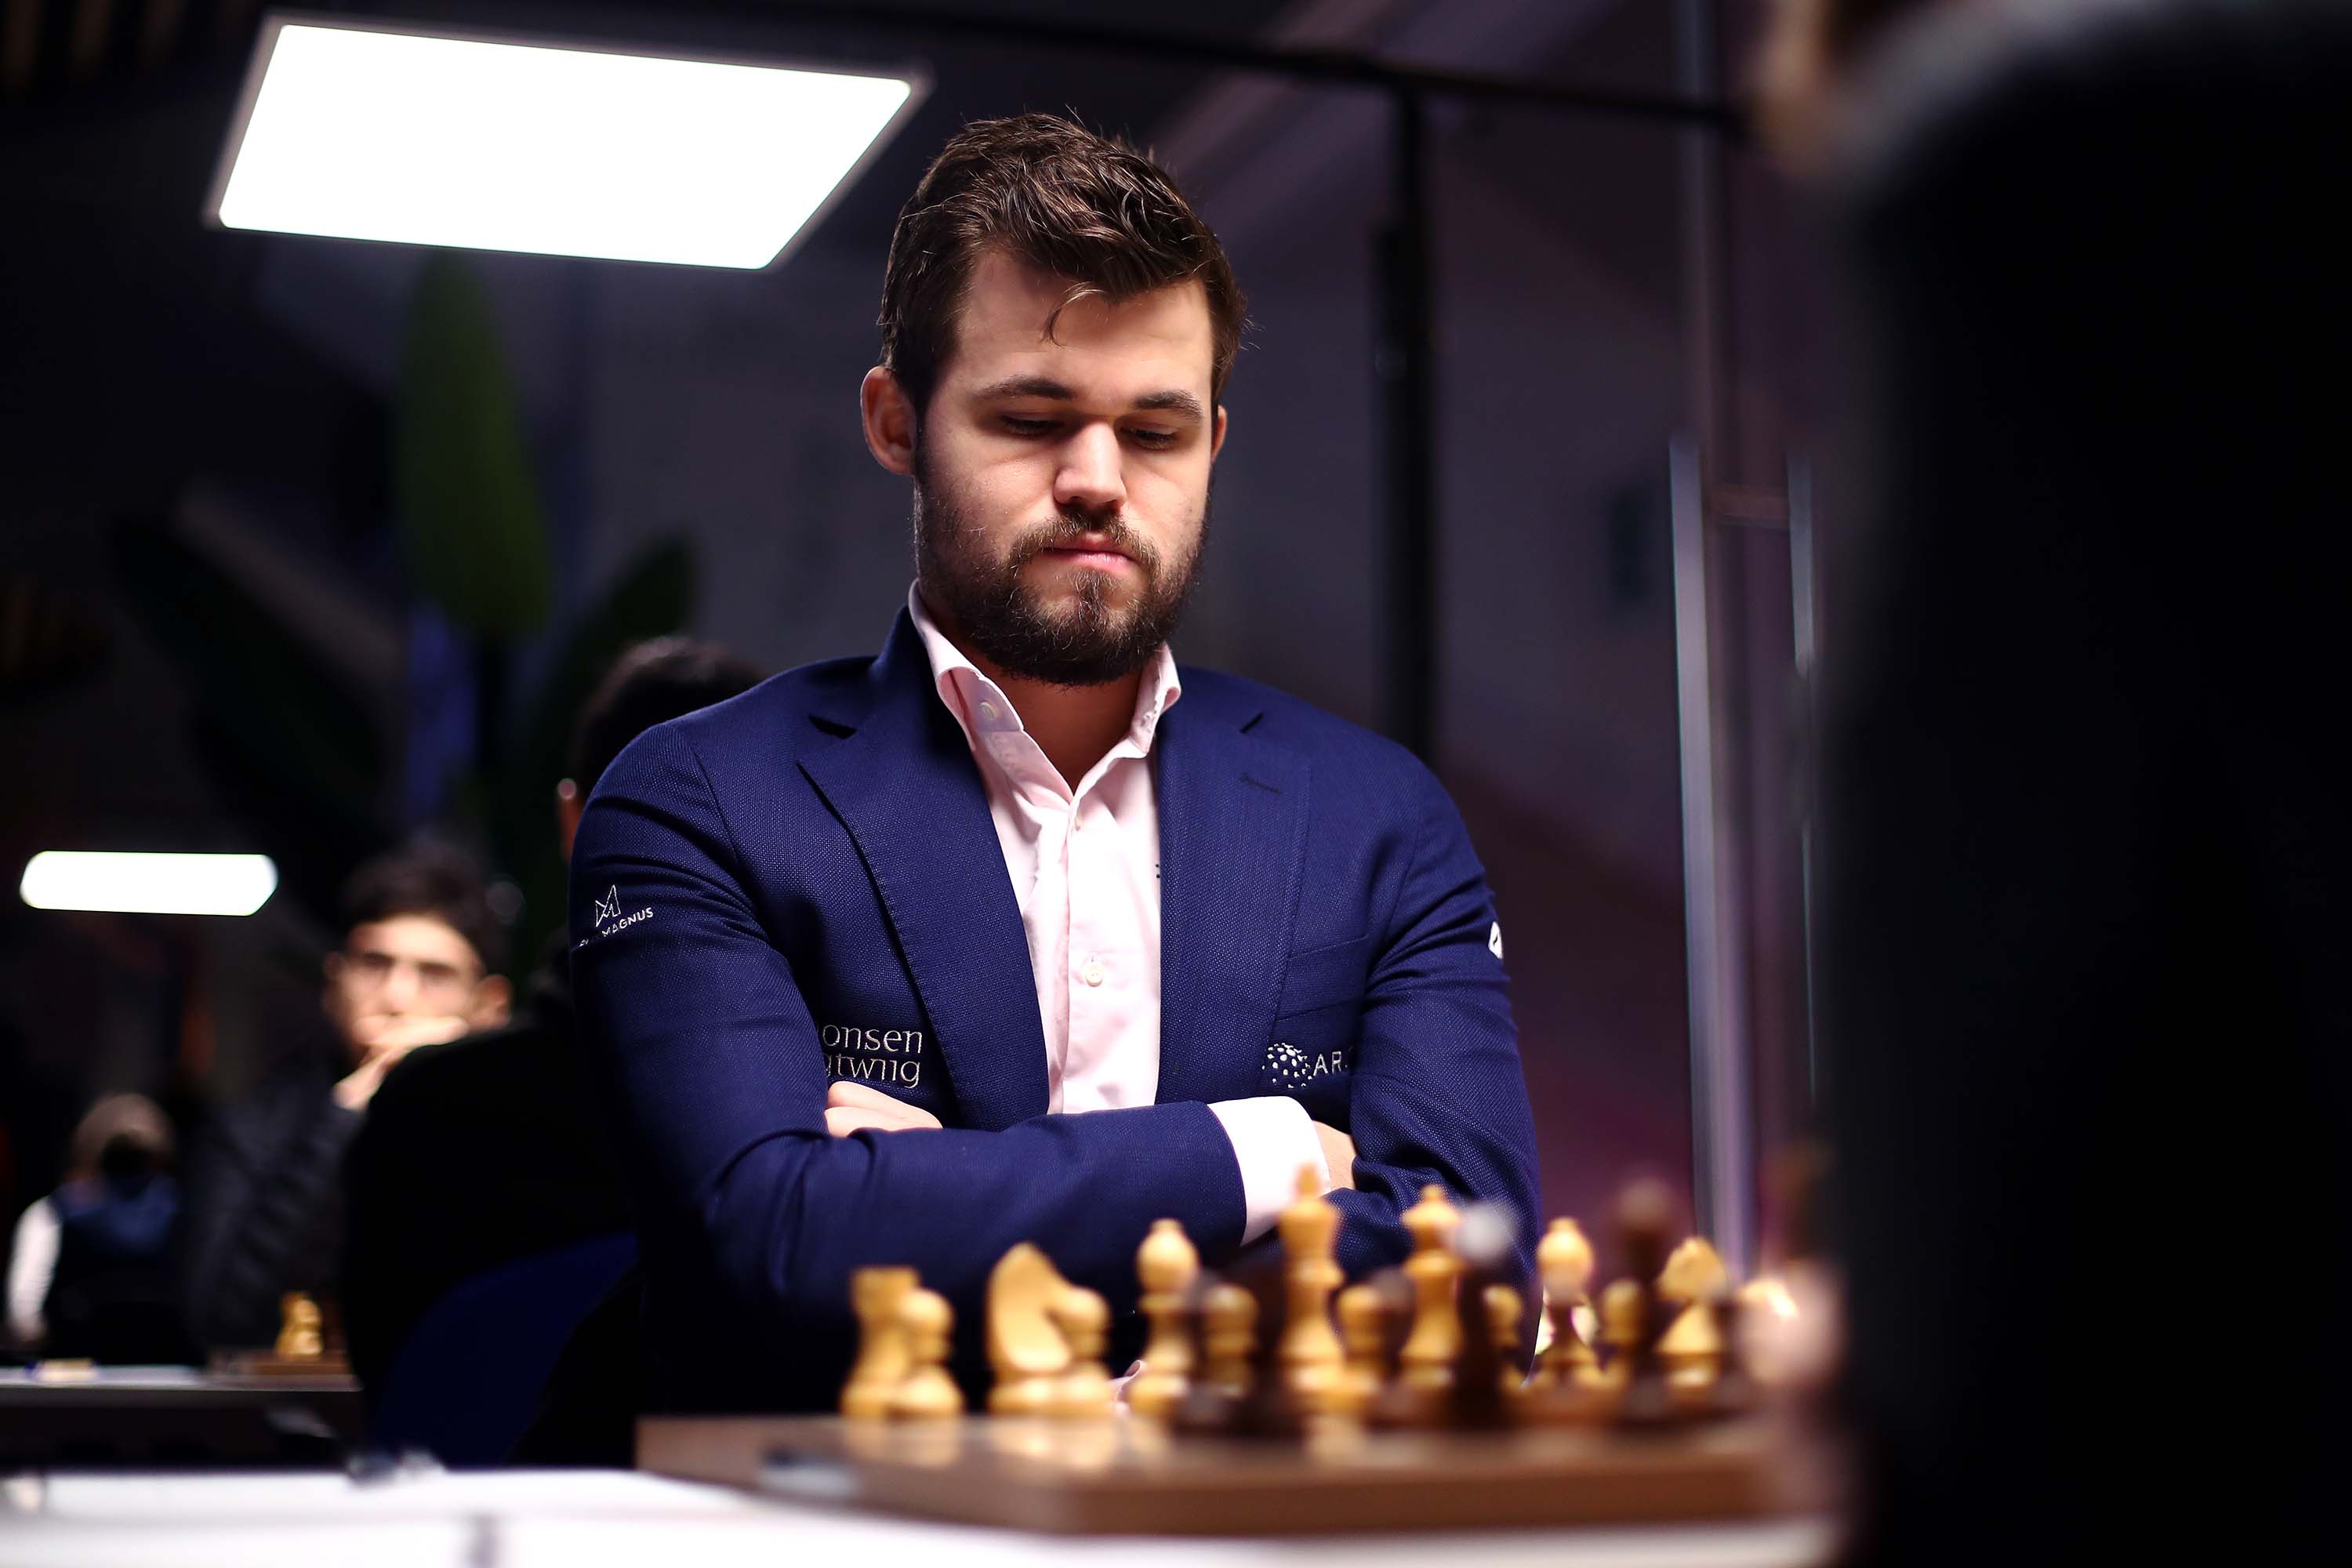 World's Best Chess Player Magnus Carlsen Now #1 in Fantasy Soccer Too